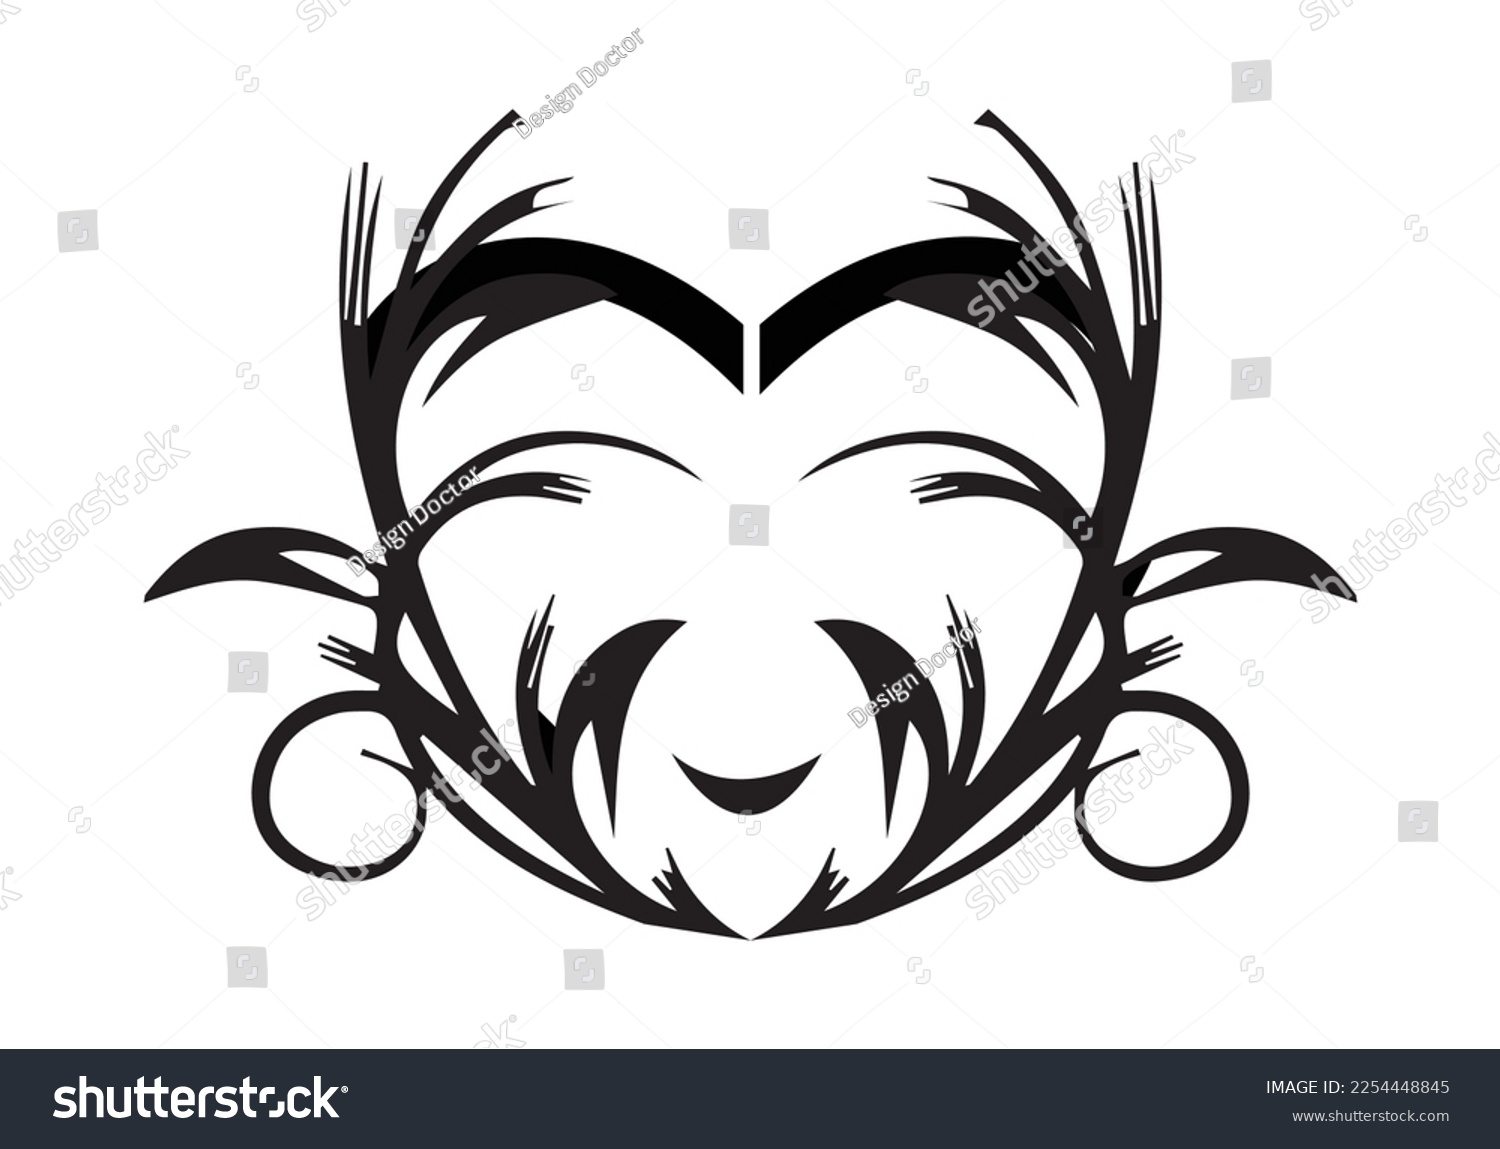 SVG of About Floral Heart Butterfly SVG Graphic. vector. icon and graphics illustration design.
 svg